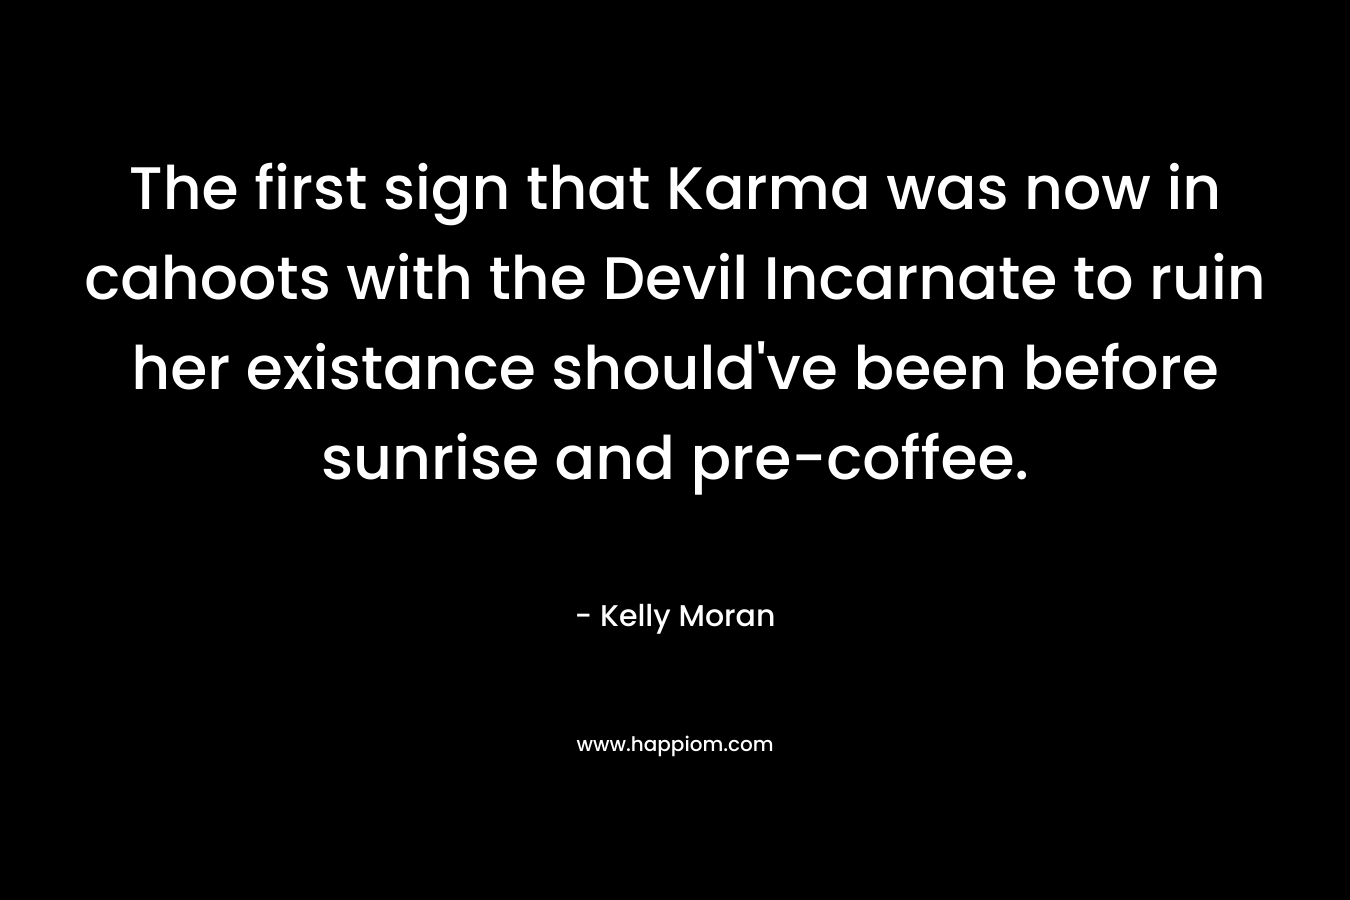 The first sign that Karma was now in cahoots with the Devil Incarnate to ruin her existance should’ve been before sunrise and pre-coffee. – Kelly Moran